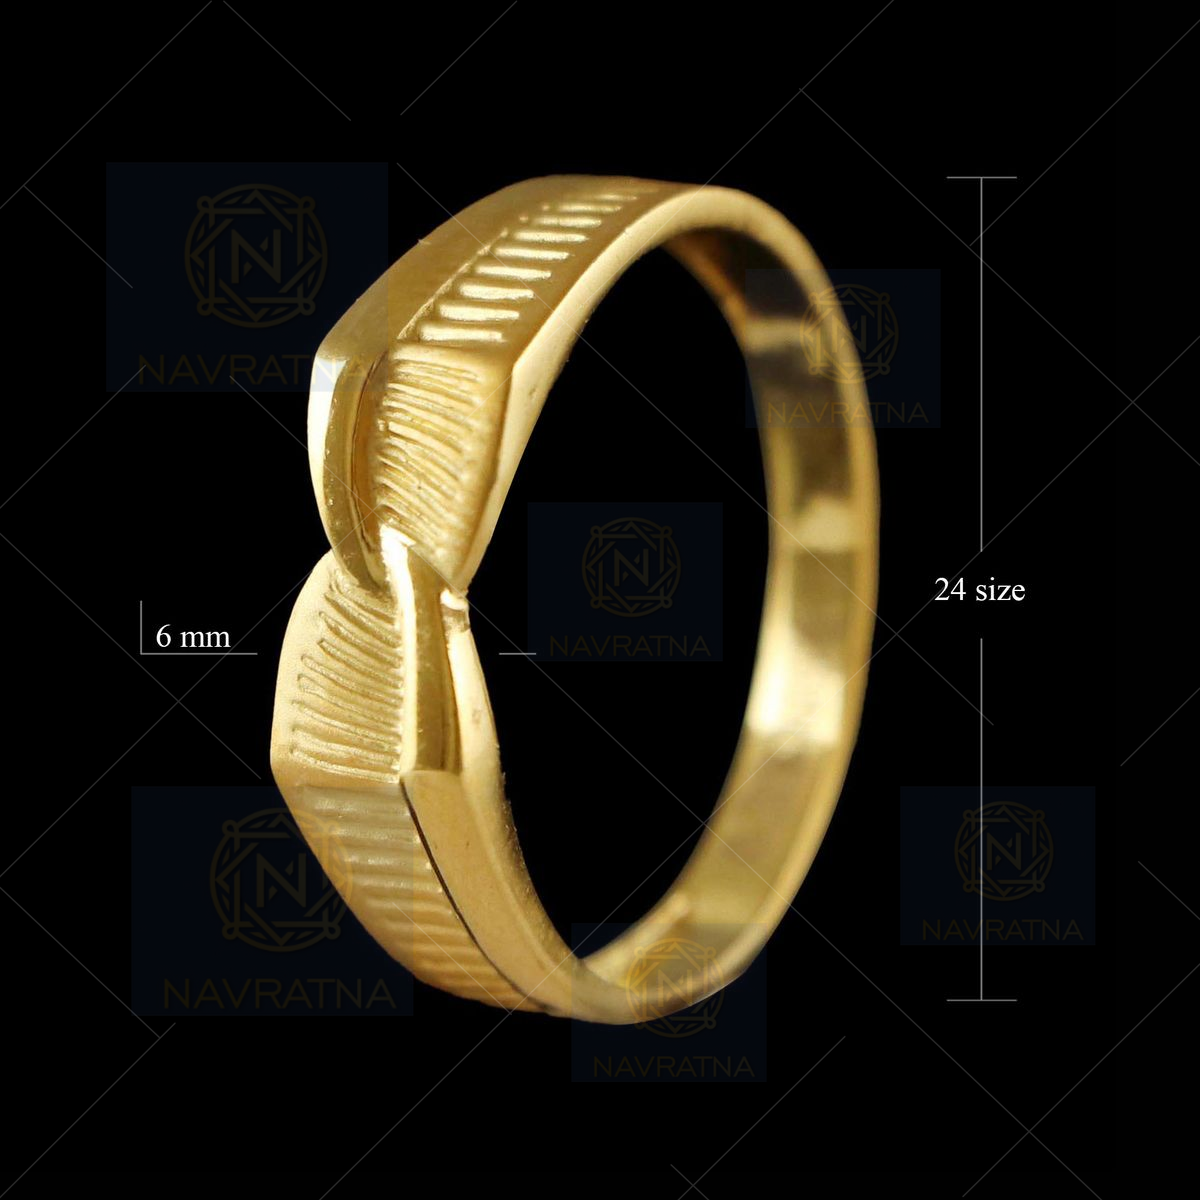 2 G Gold Ring Jewellery - 400 Latest 2 G Gold Ring Jewellery Designs @ Rs  3285